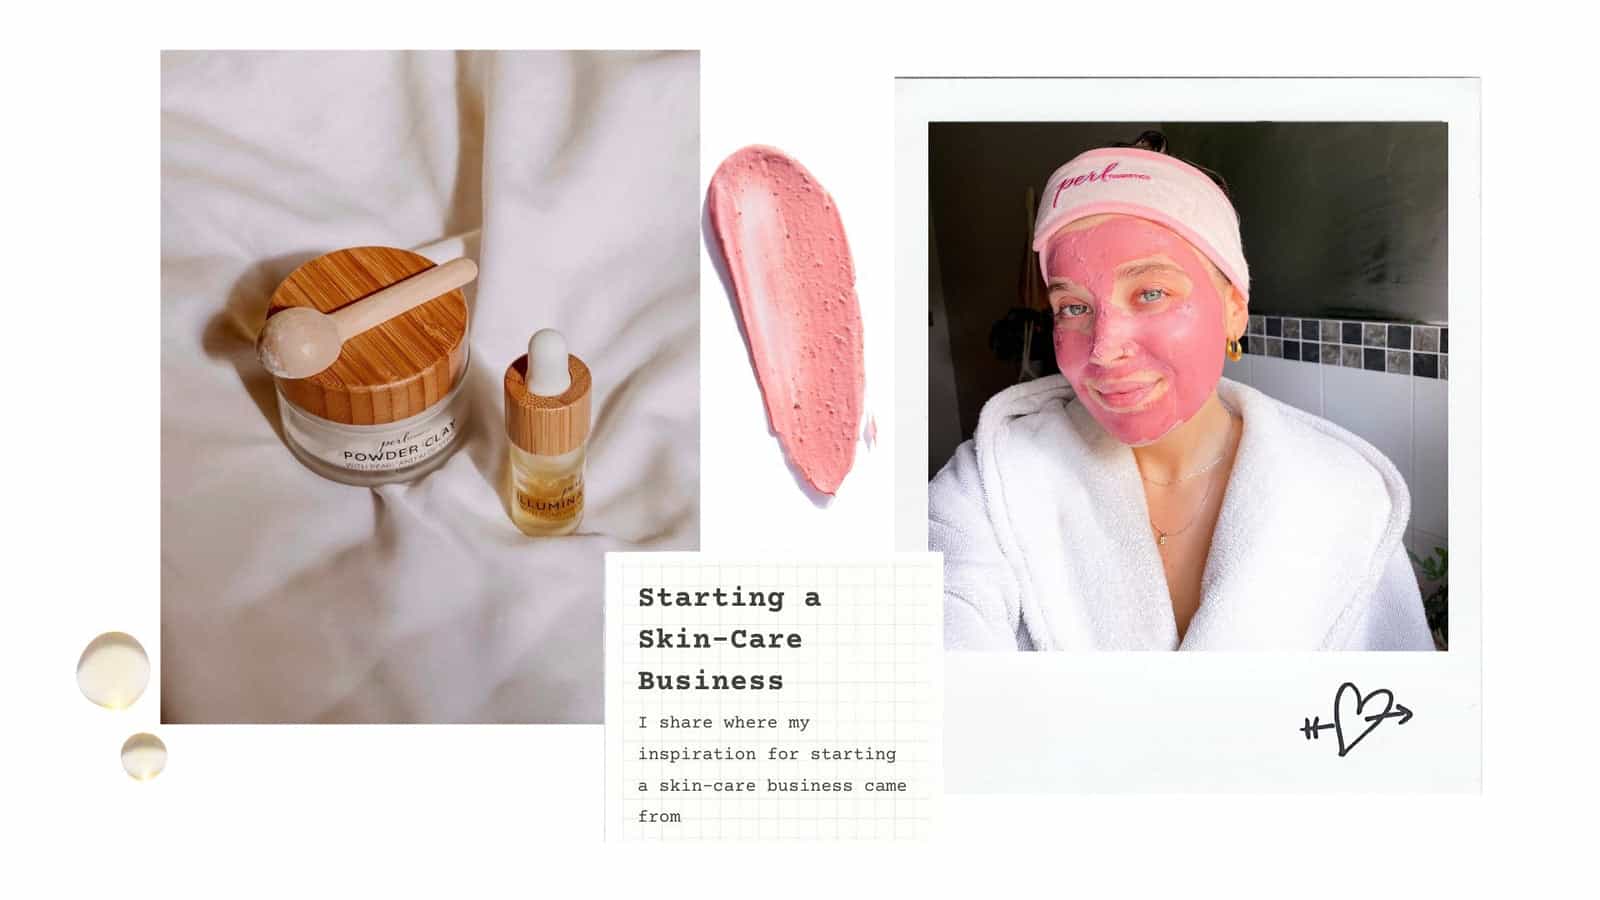 The Founder Forum: Starting a Skin-Care Business - PERL Cosmetics